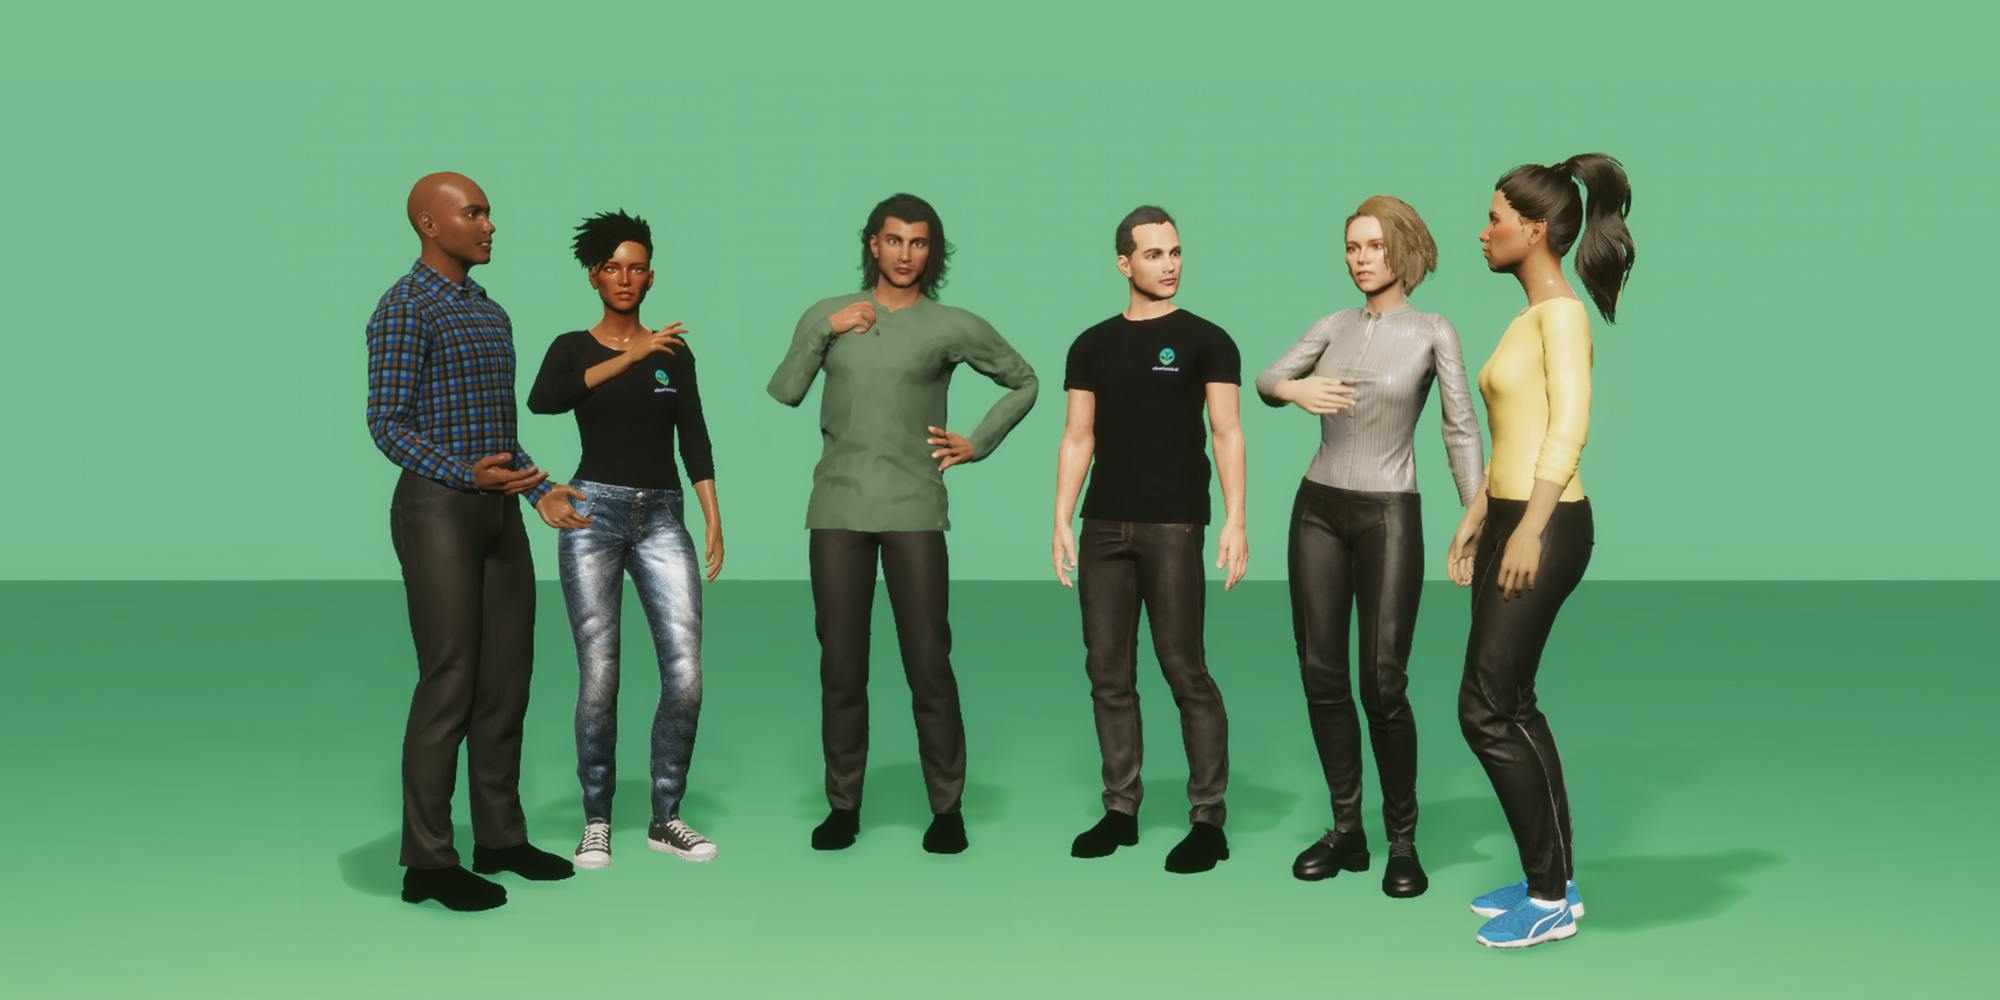 Six 3D human avatars standing together against a green background. Their poses are casual and conversational. 